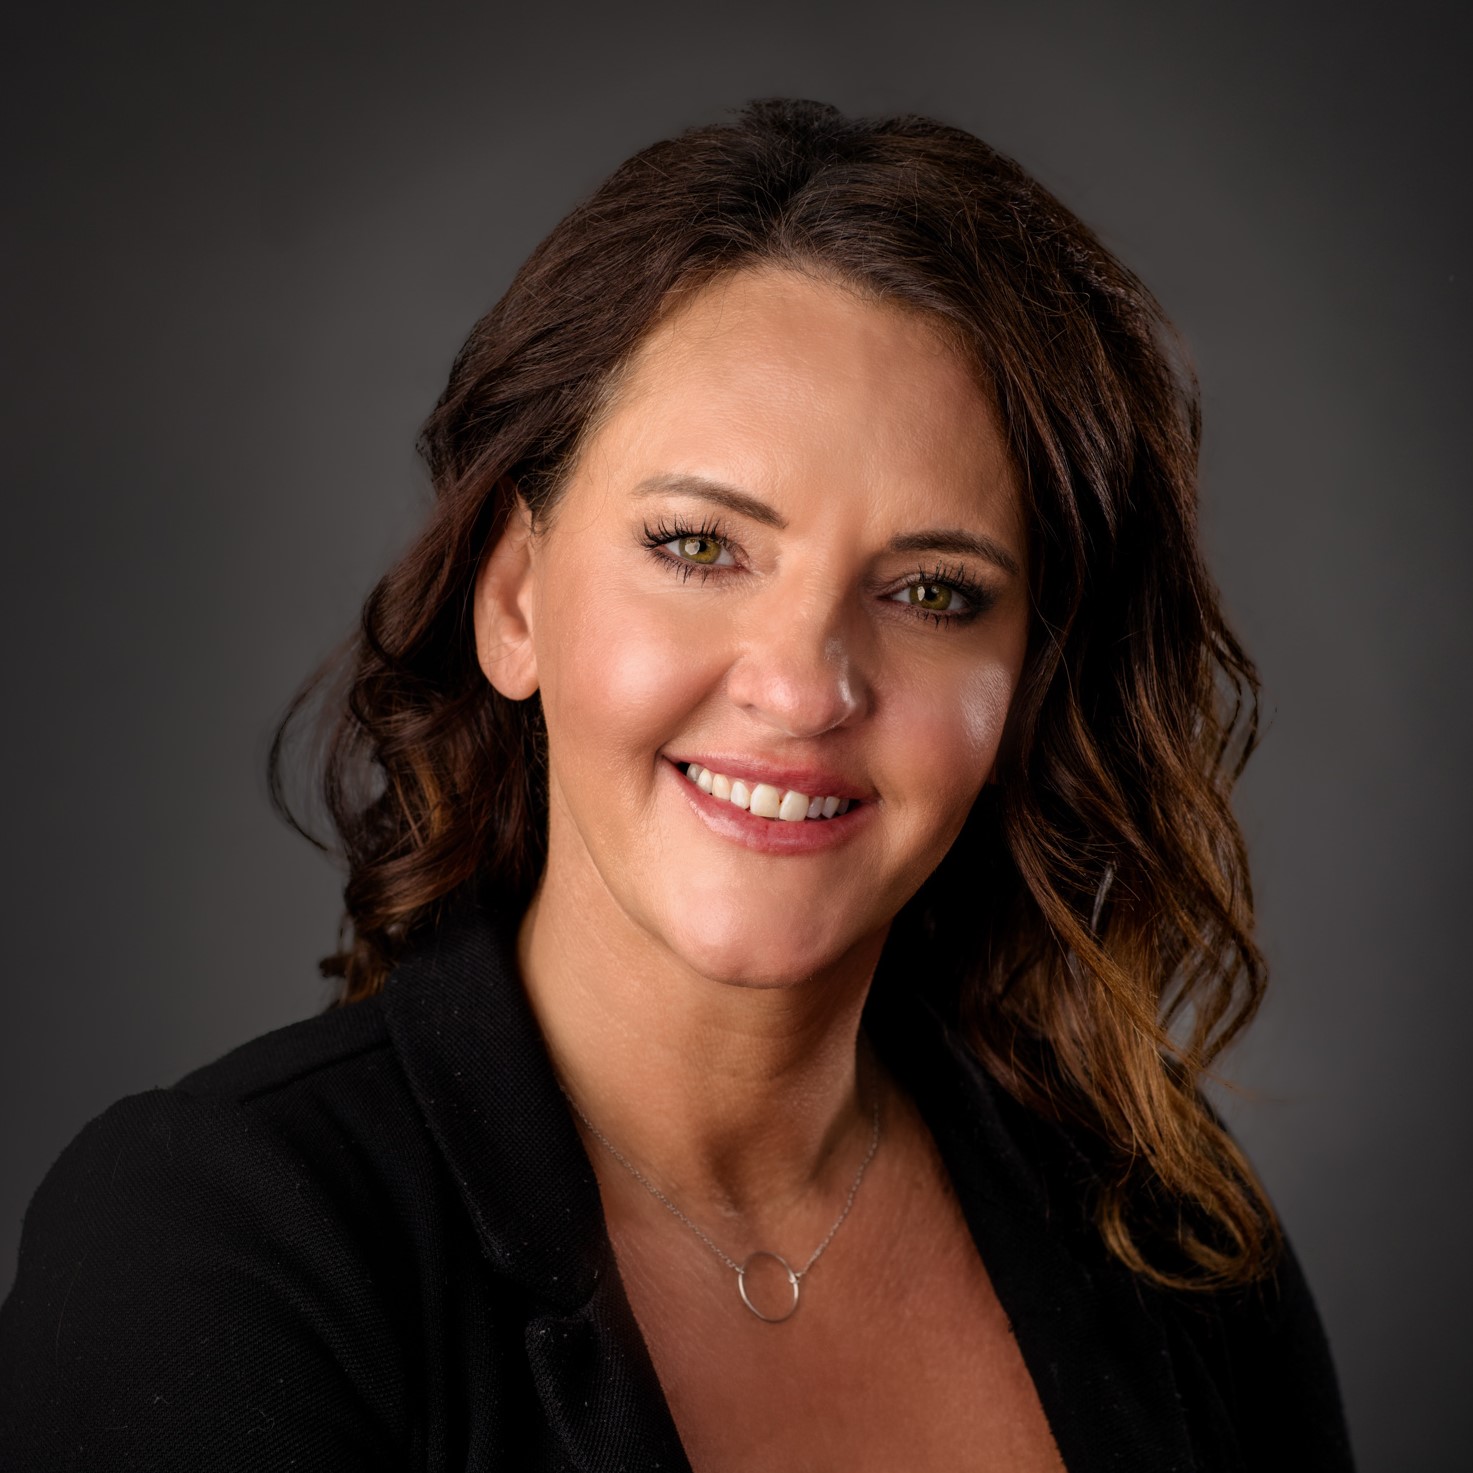 Headshot photograph of Kristi Hinegardner, Director of Clinical Operations